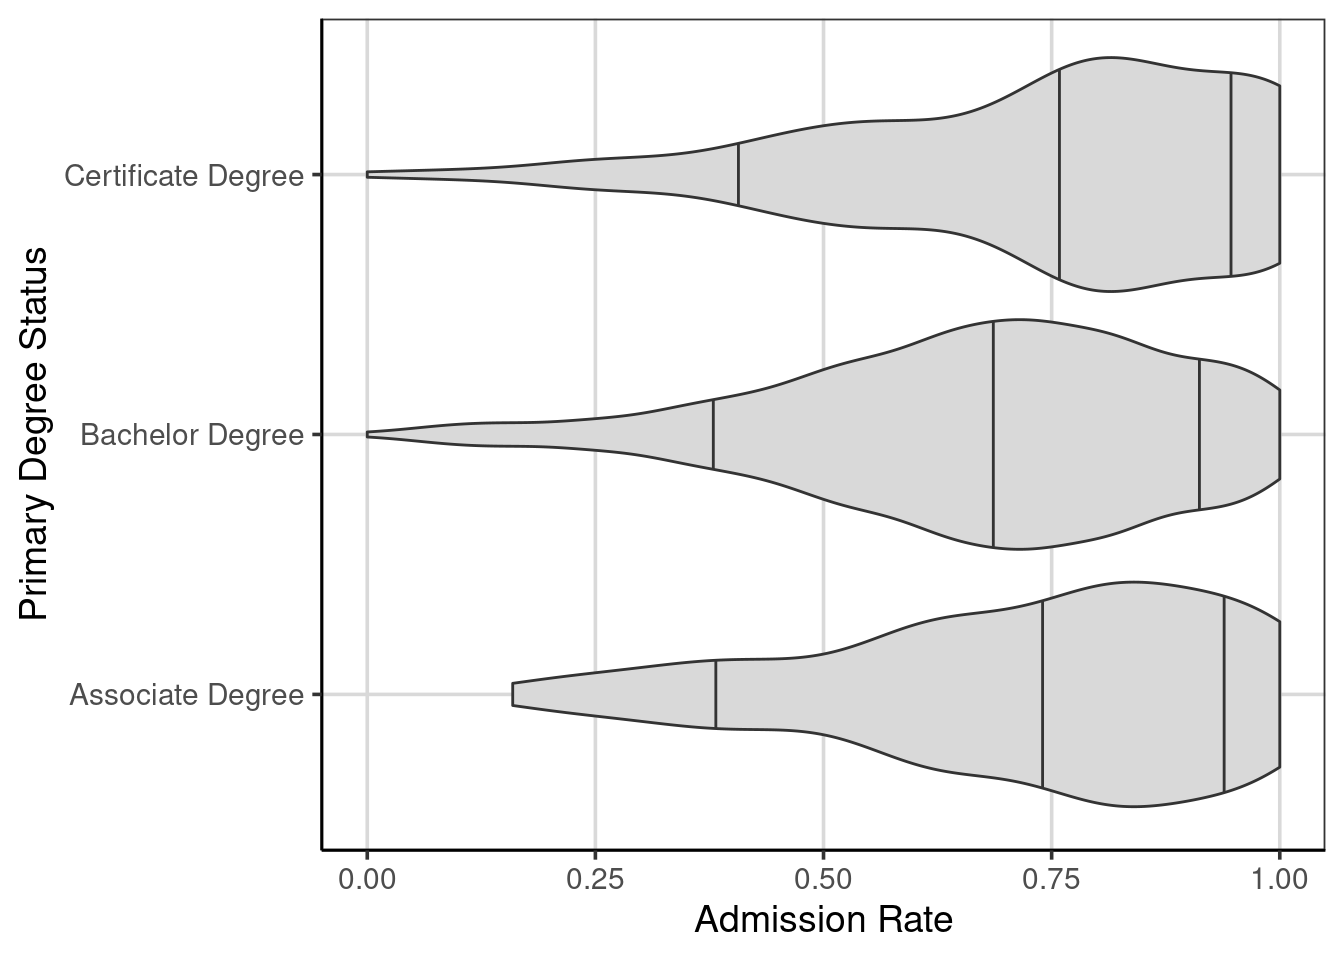 Violin plots of the college admission rates by the primary degree status.